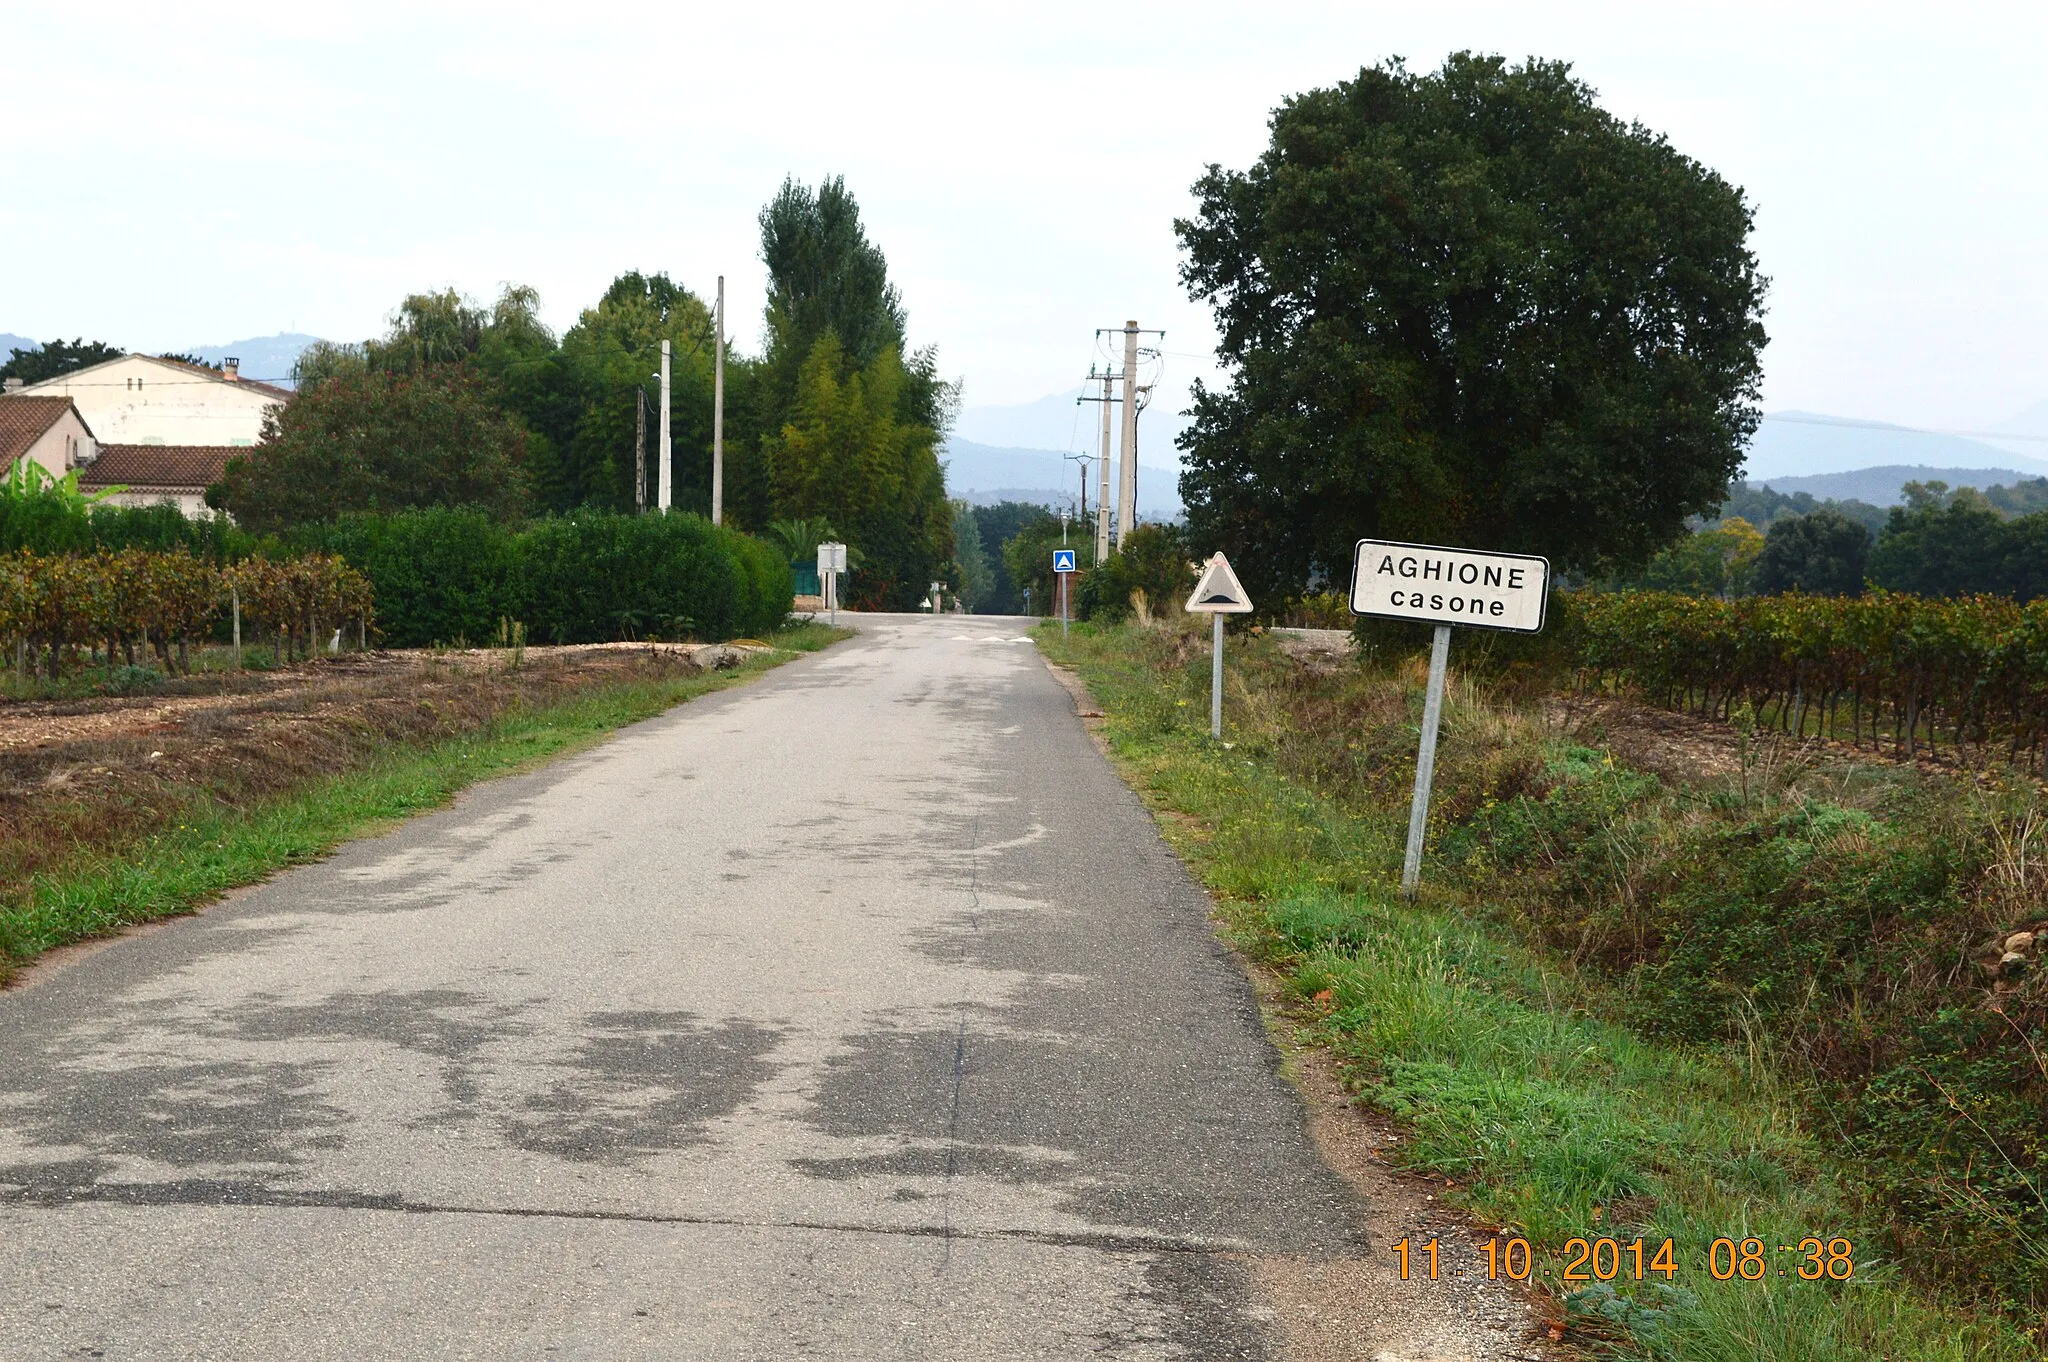 Photo showing: The entry to Aghione